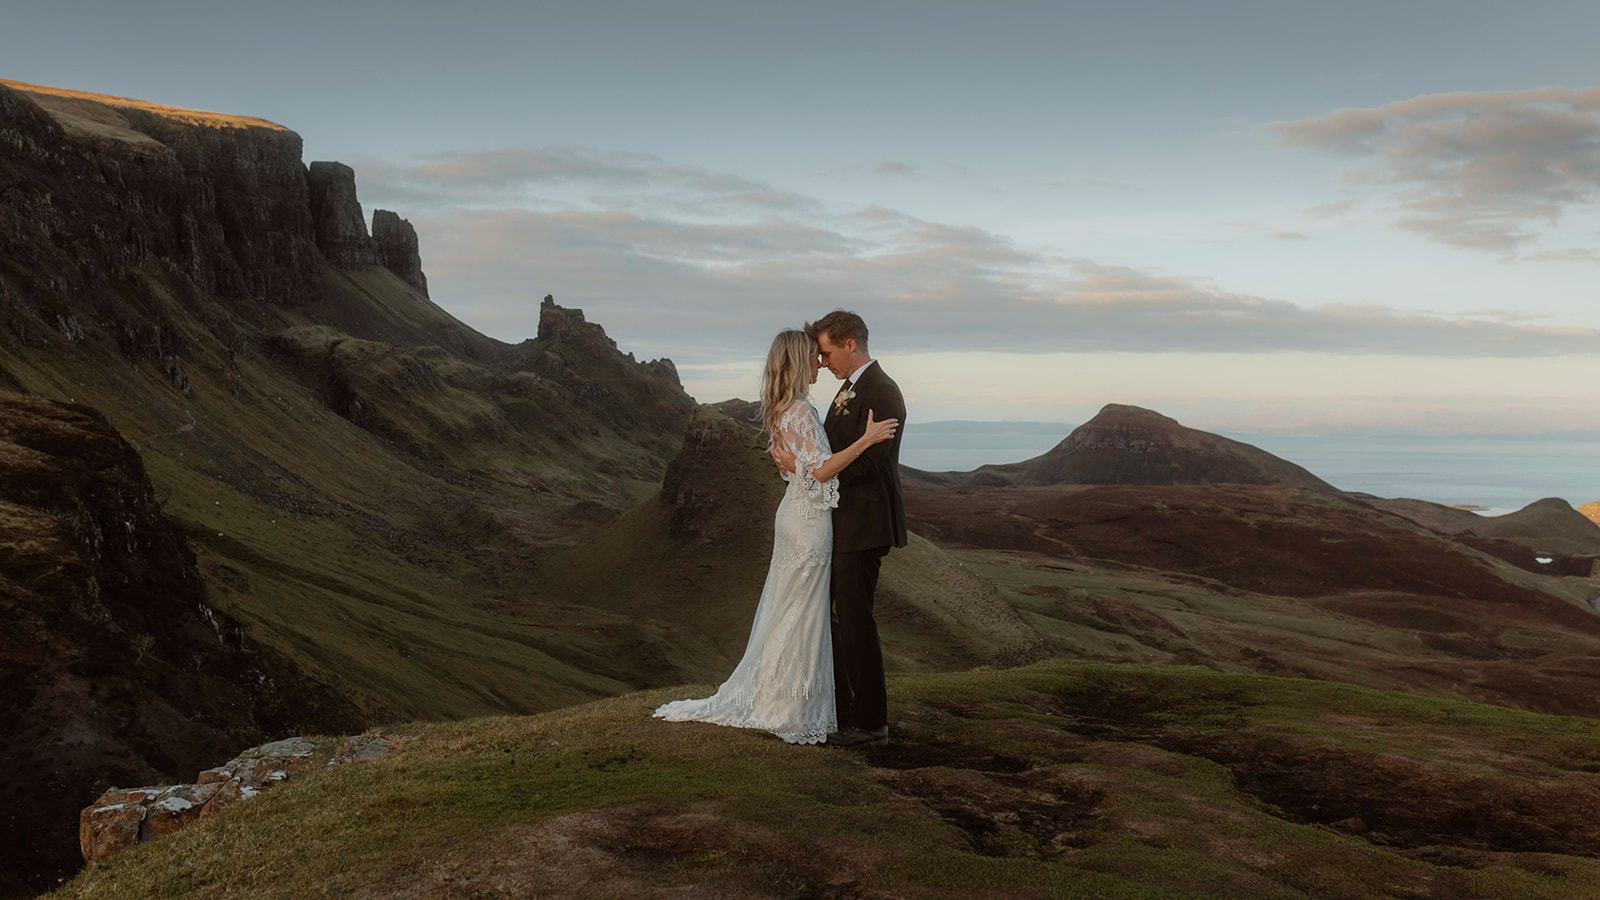 Kara and Andy shared a romantic moment after their Isle of Skye elopement ceremony